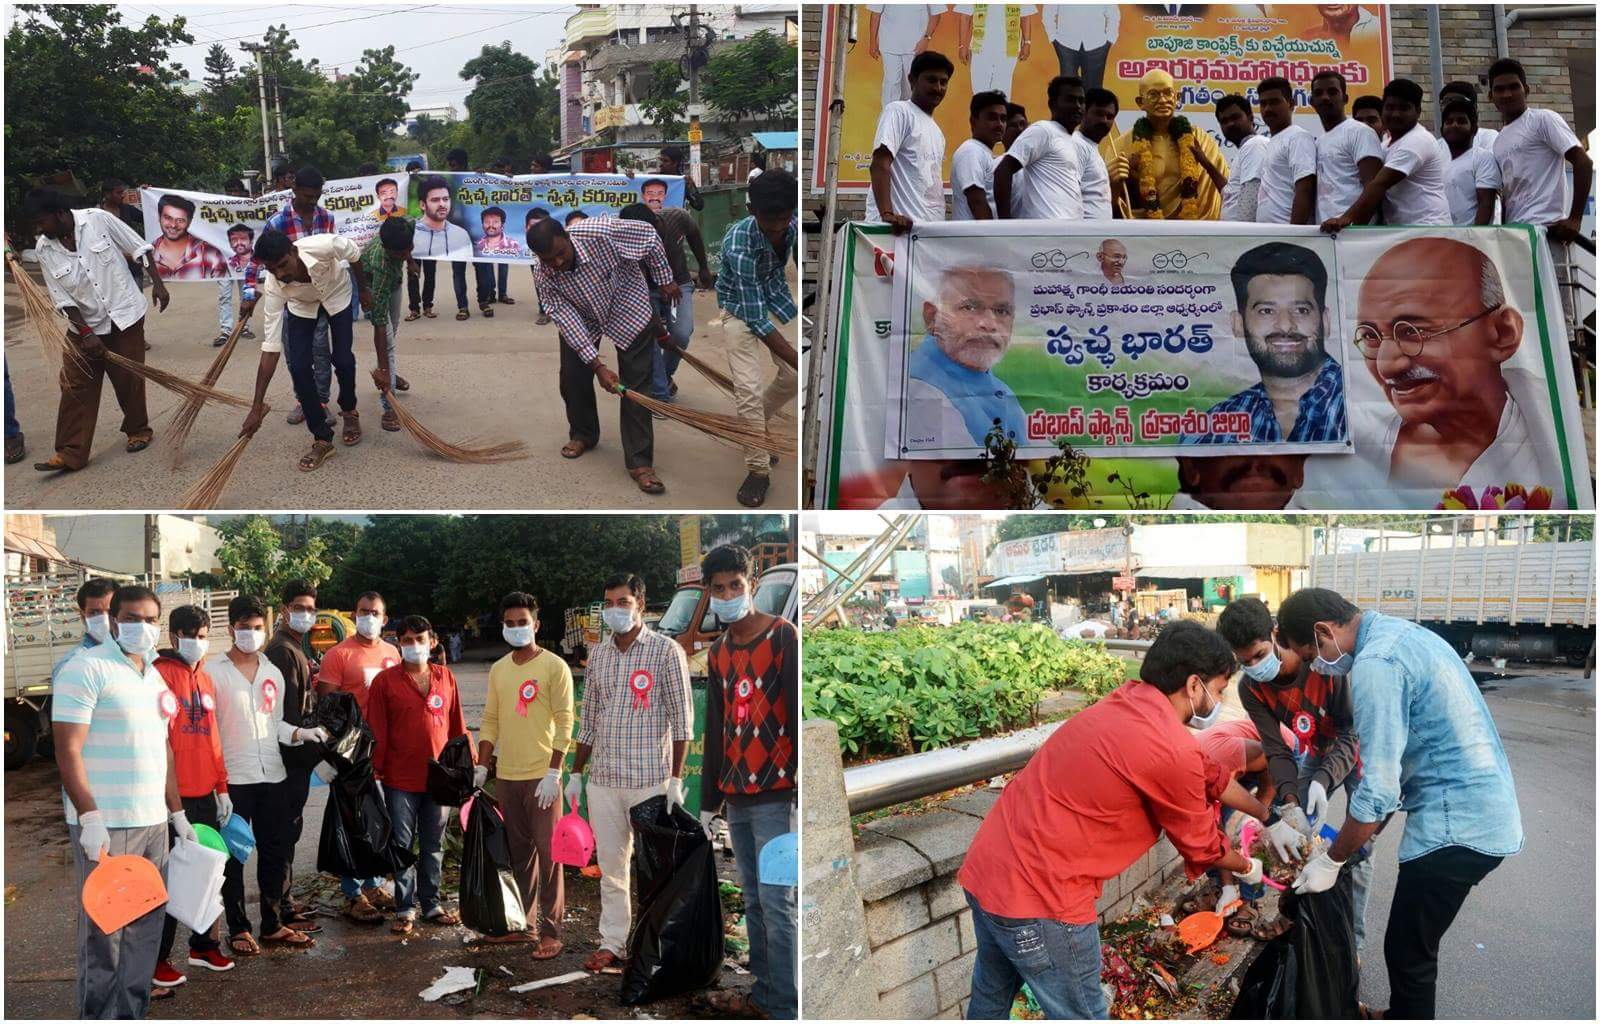 Prabhas thanked his fans for appreciating his clean India mission